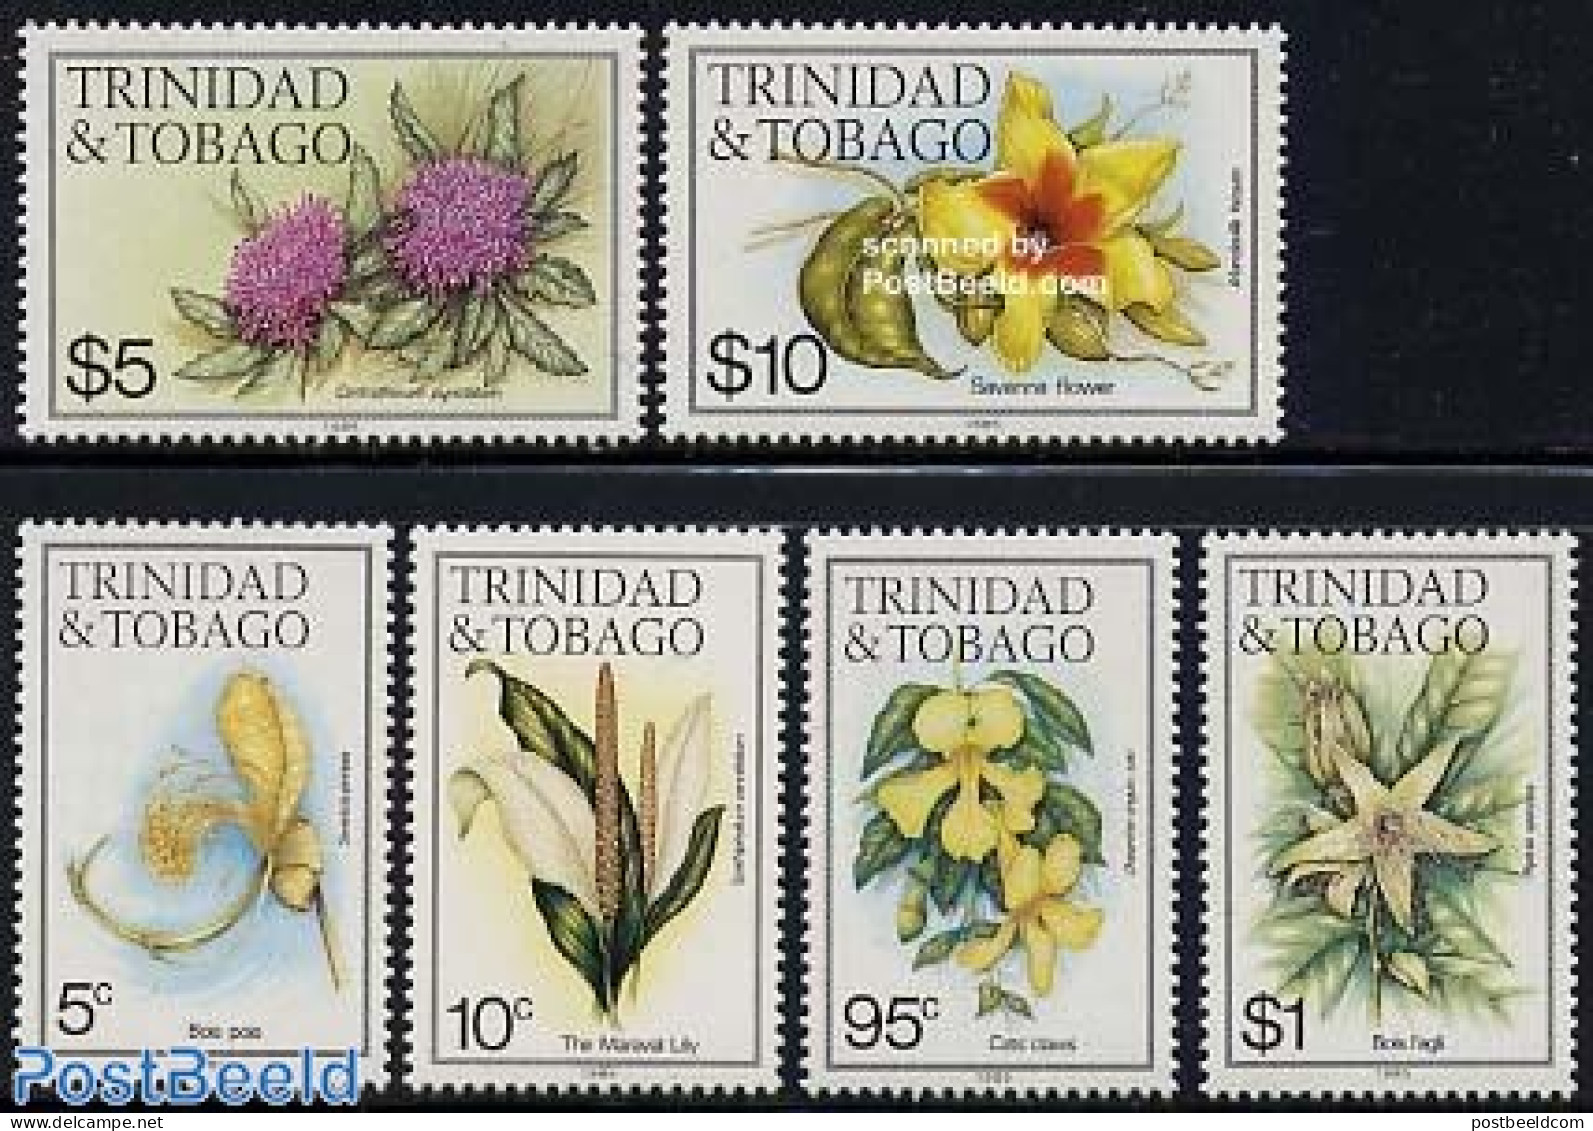 Trinidad & Tobago 1985 Flowers 6v (with Year 1985), Mint NH, Nature - Flowers & Plants - Trinidad & Tobago (1962-...)